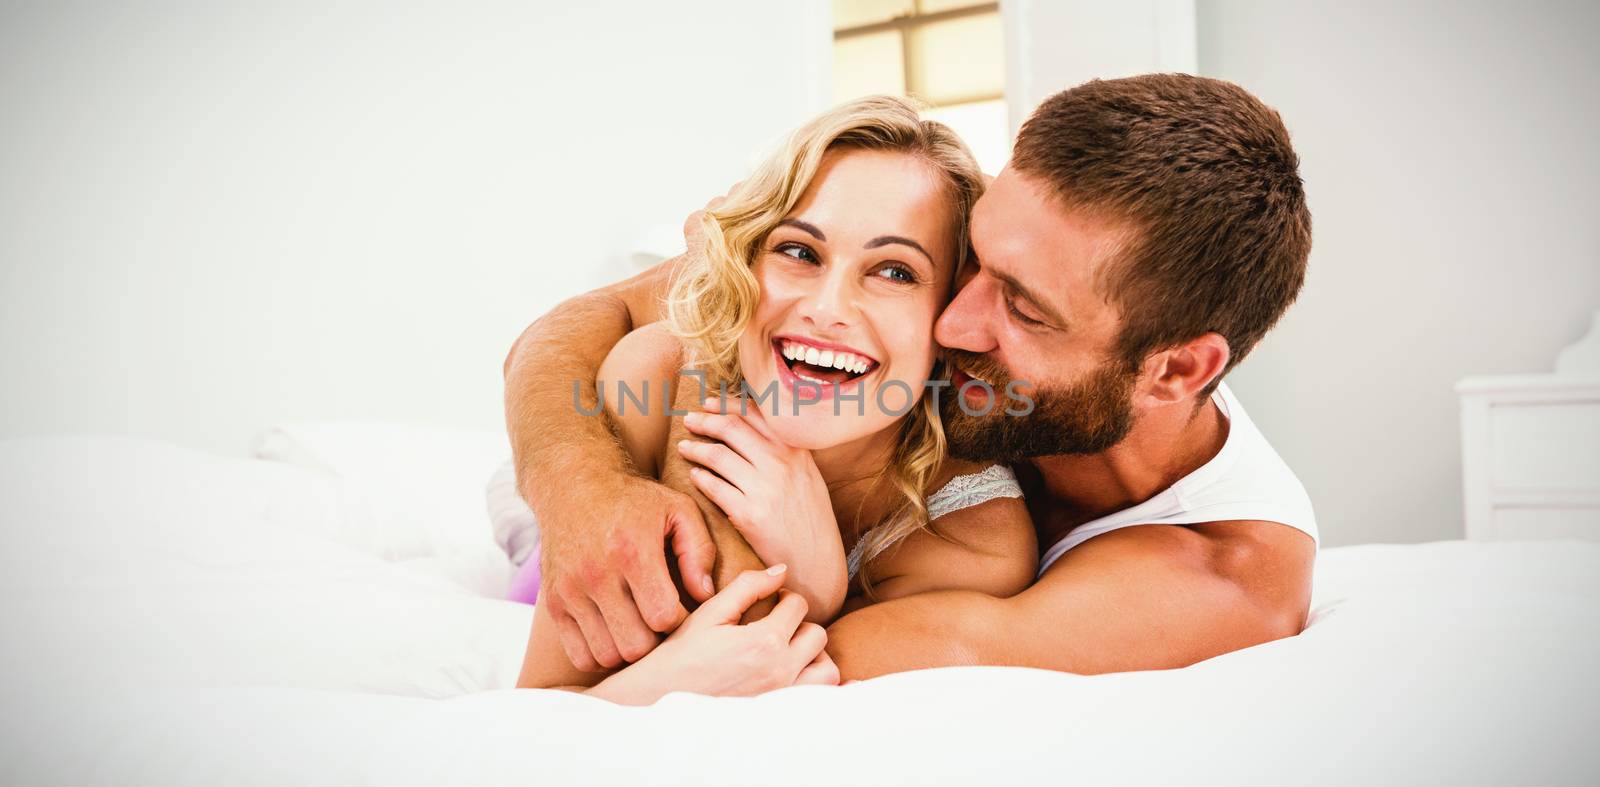 Young couple embracing on bed by Wavebreakmedia